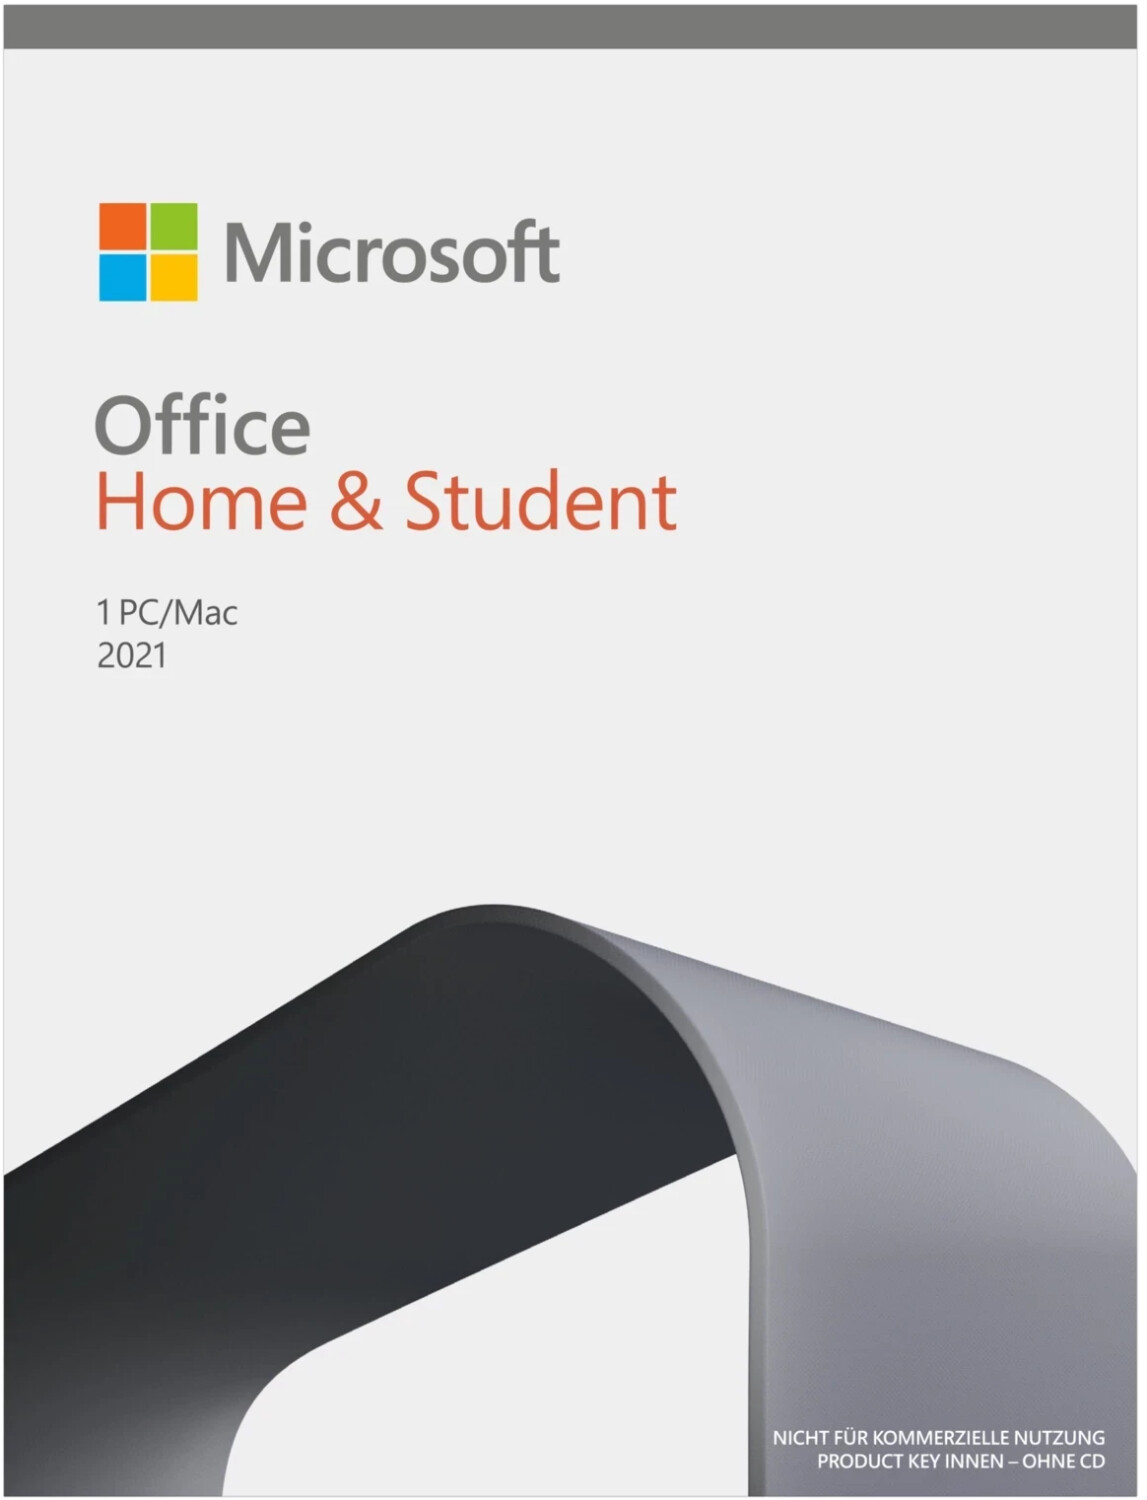 купить MS Office Home and Student 2021 English Central/Eastern Euro Only Medialess в Алматы